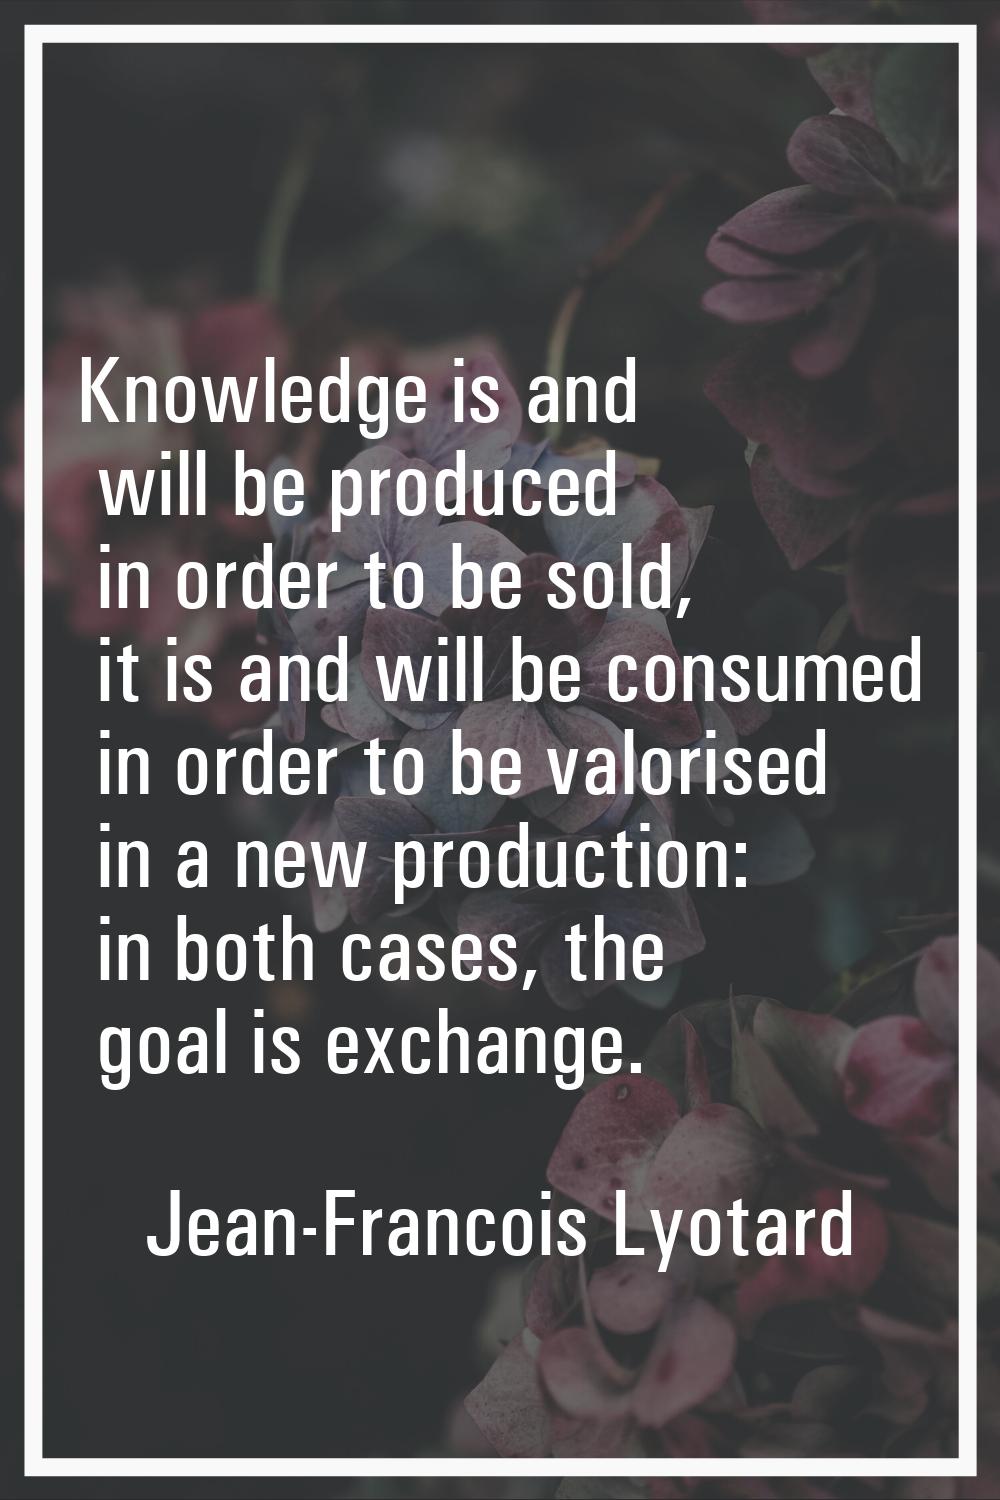 Knowledge is and will be produced in order to be sold, it is and will be consumed in order to be va